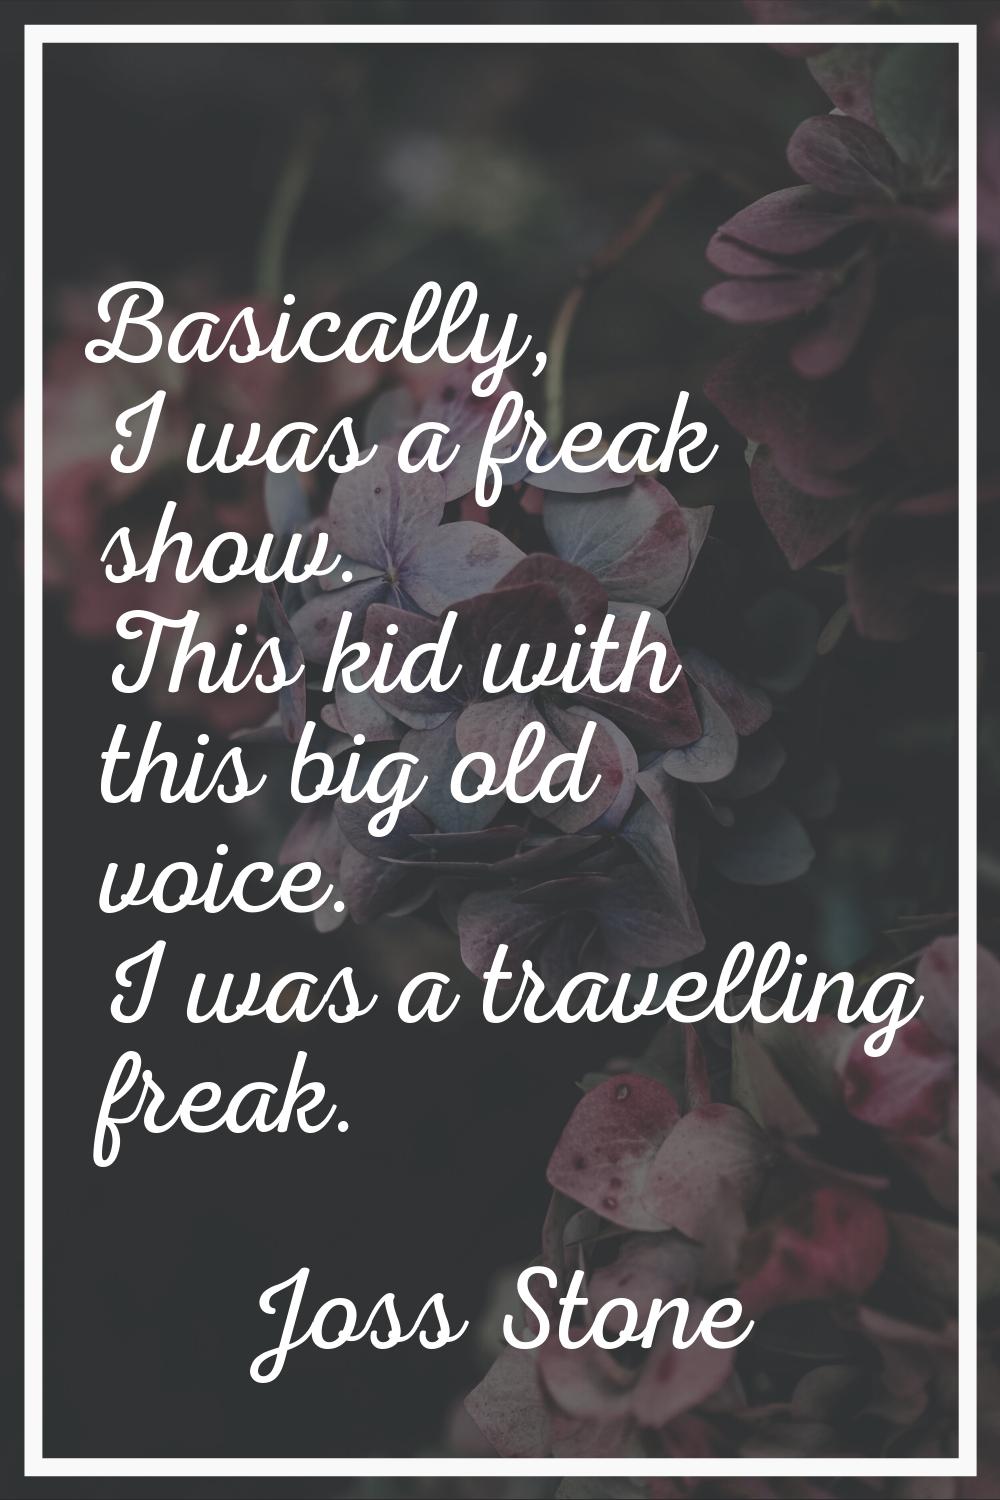 Basically, I was a freak show. This kid with this big old voice. I was a travelling freak.